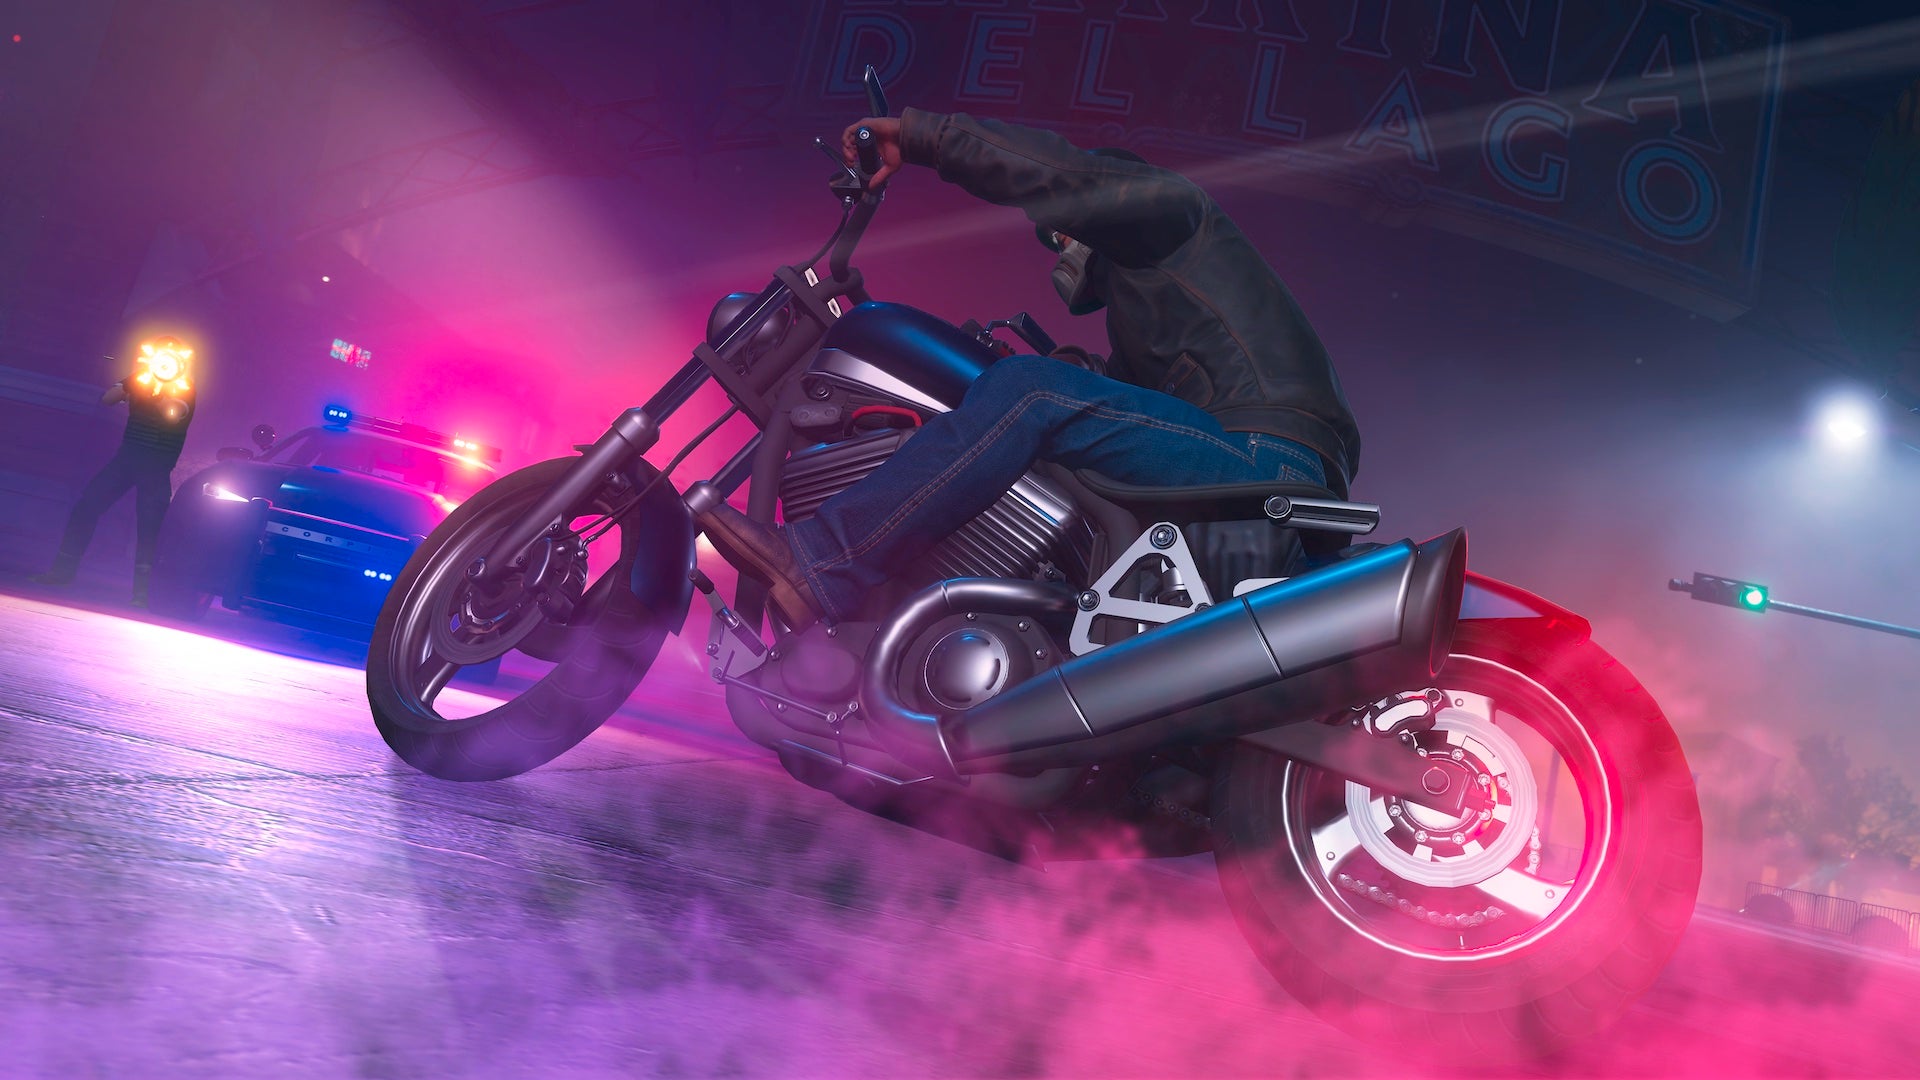 A member of the Saints burns rubber on their motorbike in Saints Row.